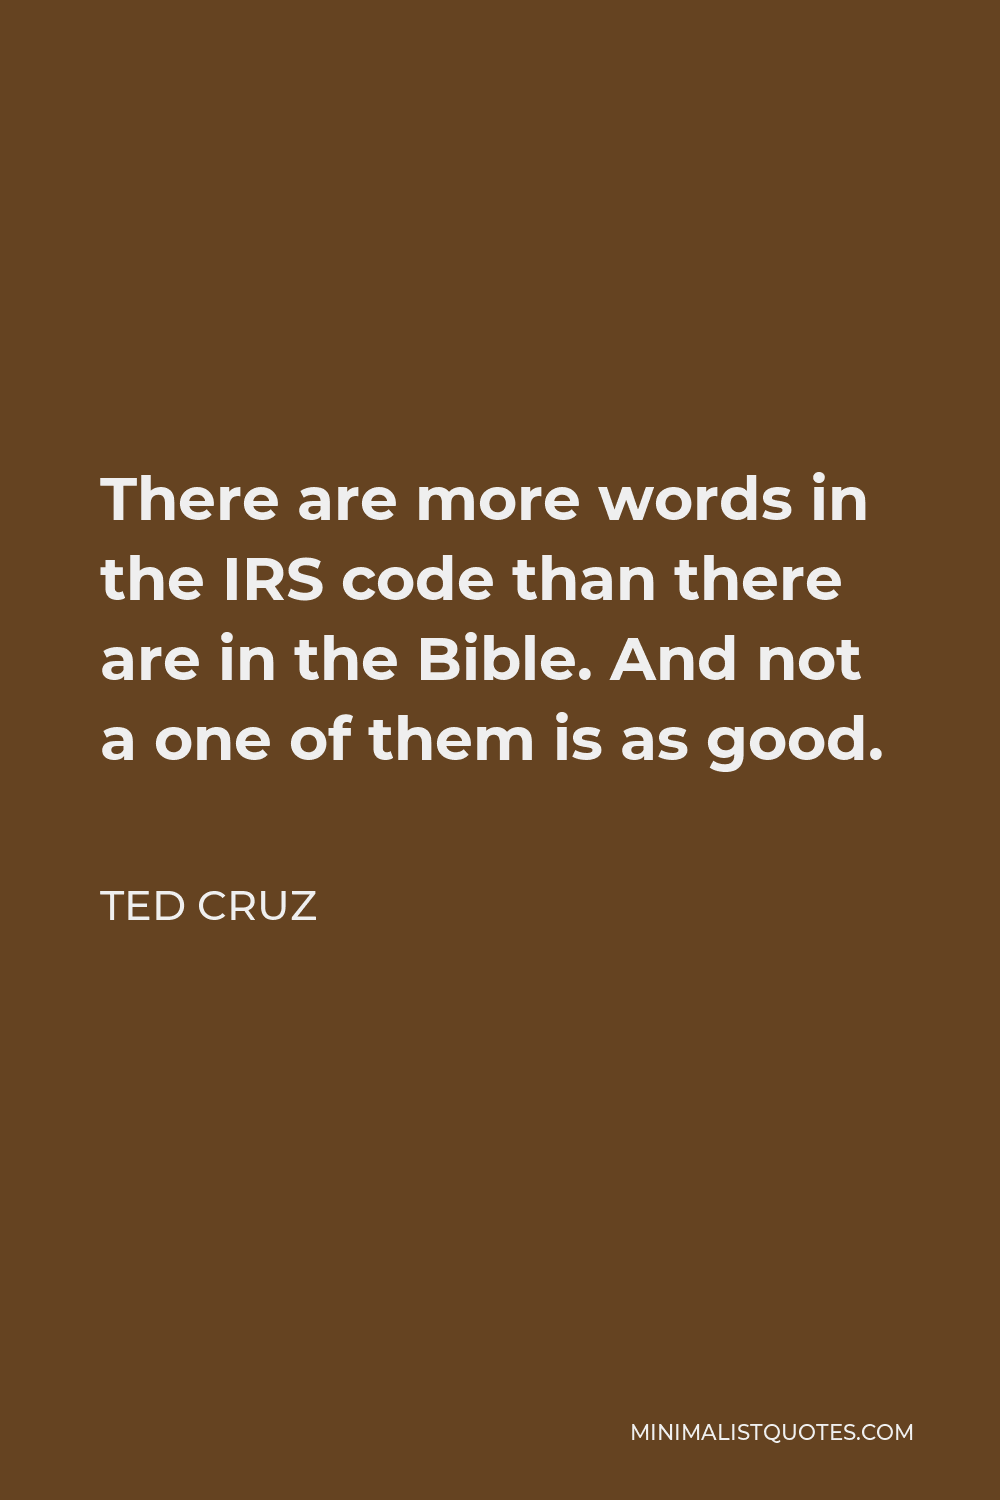 Ted Cruz Quote - There are more words in the IRS code than there are in the Bible. And not a one of them is as good.